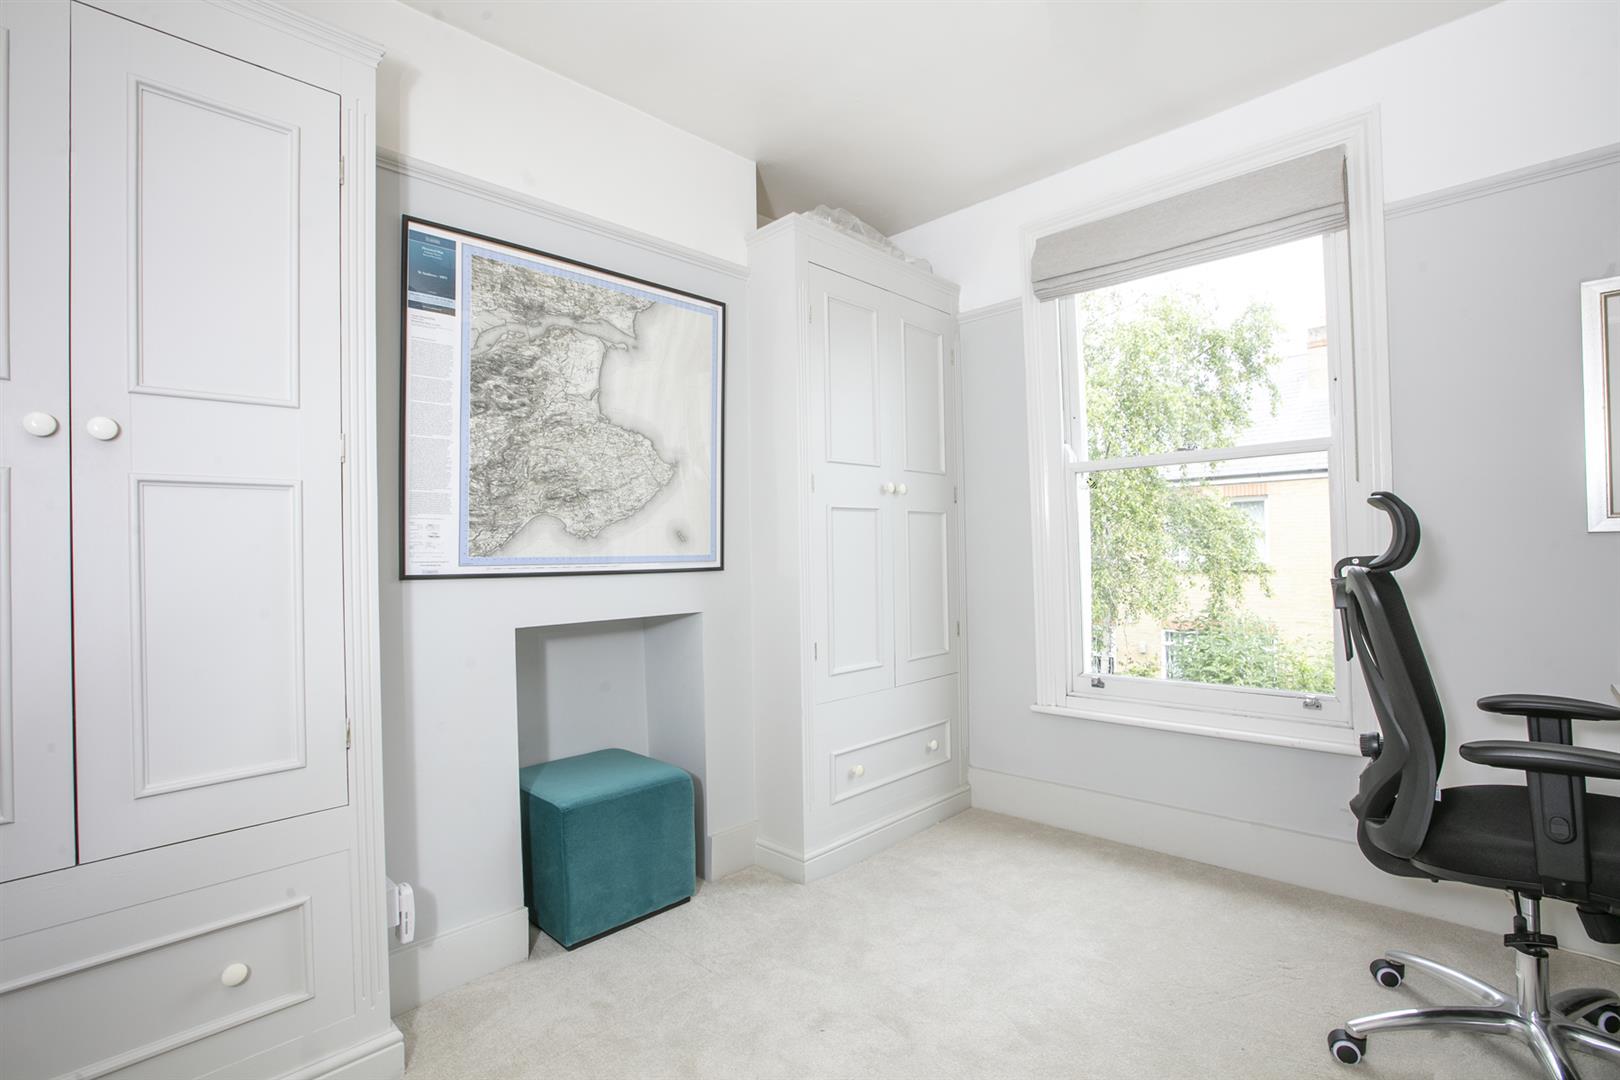 House - Semi-Detached For Sale in Sartor Road, Nunhead, SE15 1111 view15